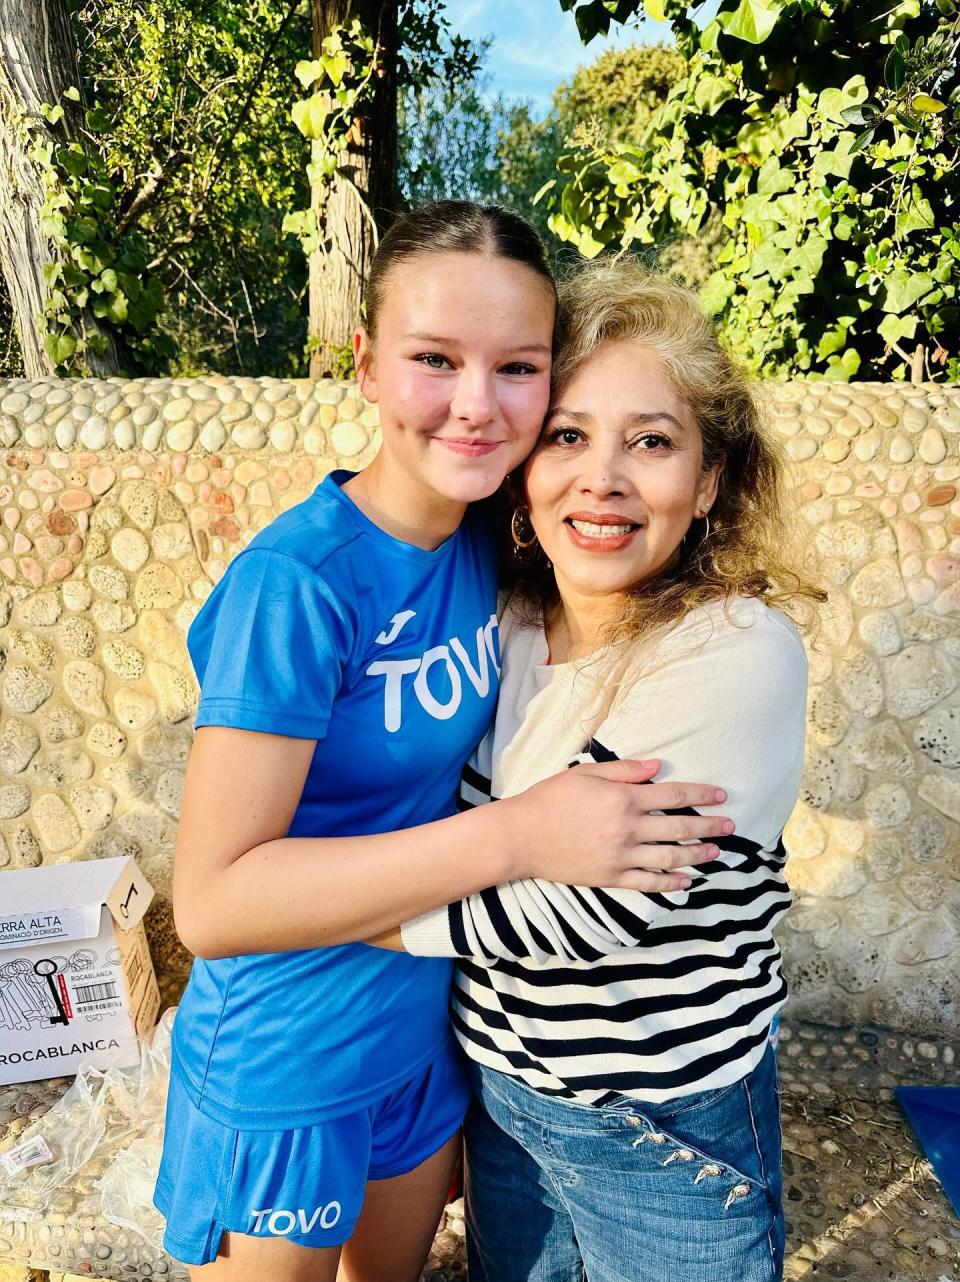 Leah Schamberg poses with the "house mother" Monica Ruiz, who supervised her group while the New Paltz native boarded in Spain in January.